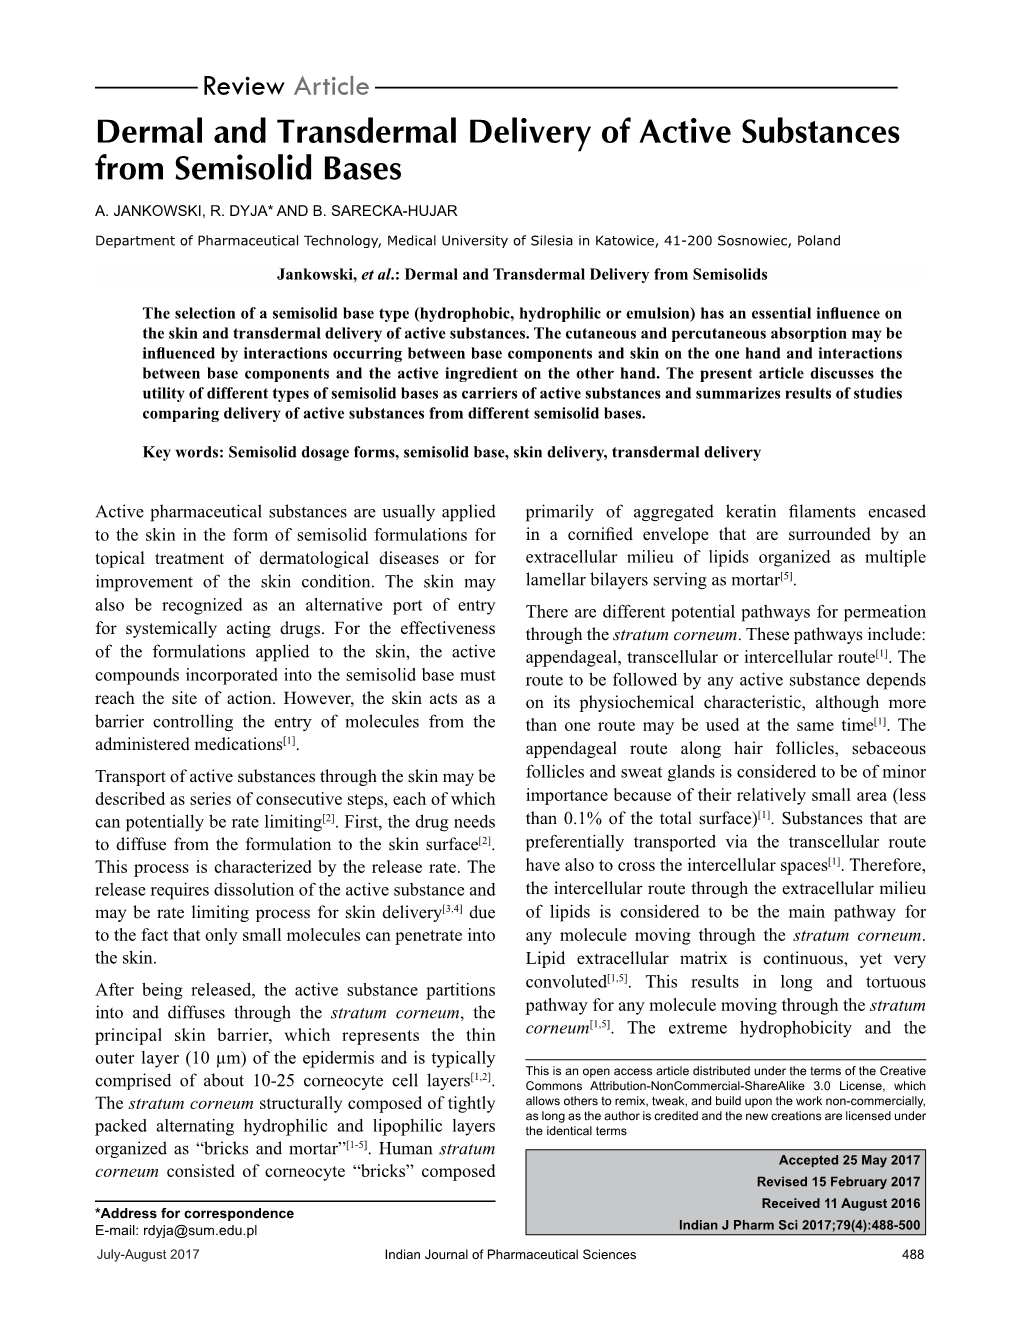 Dermal and Transdermal Delivery of Active Substances from Semisolid Bases